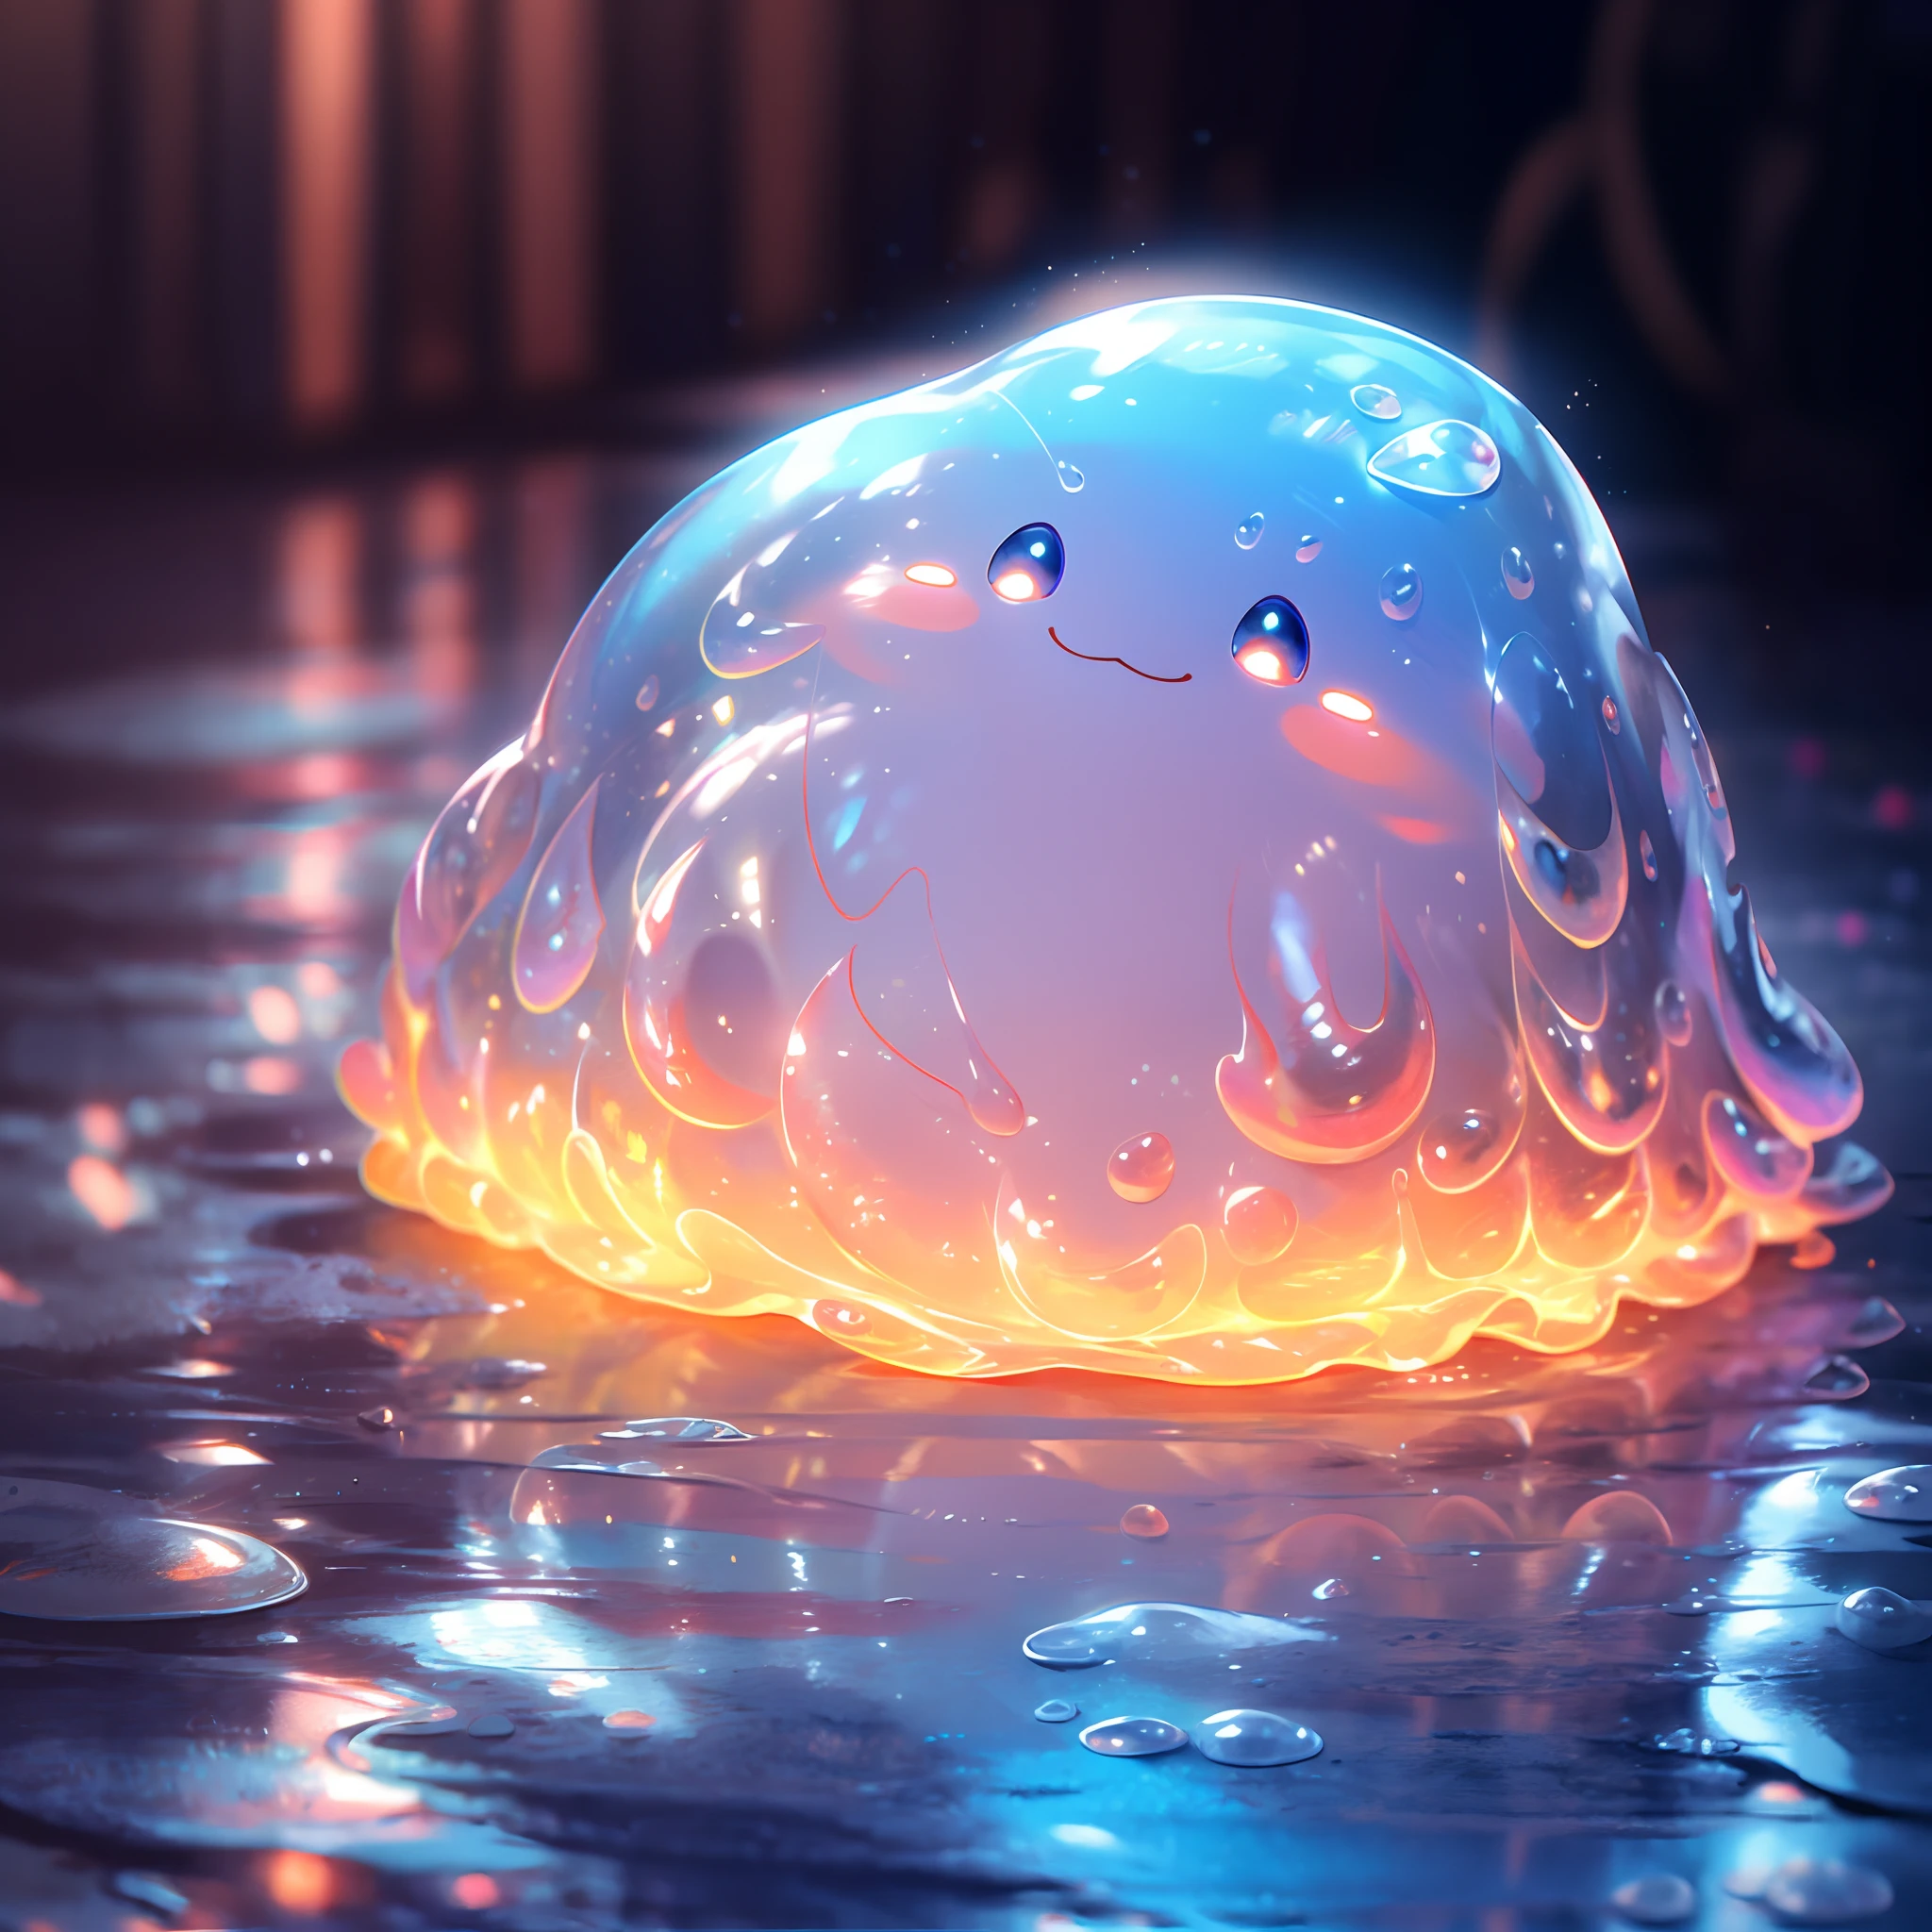 A shiny blue and red slime, cute face,vibrant and translucent texture, slime stretching and squishing, detailed, mesmerizing patterns and swirls, sparkling and reflecting light, satisfying to touch and play with, high-res masterpiece, vivid colors, illuminated with soft studio lighting.